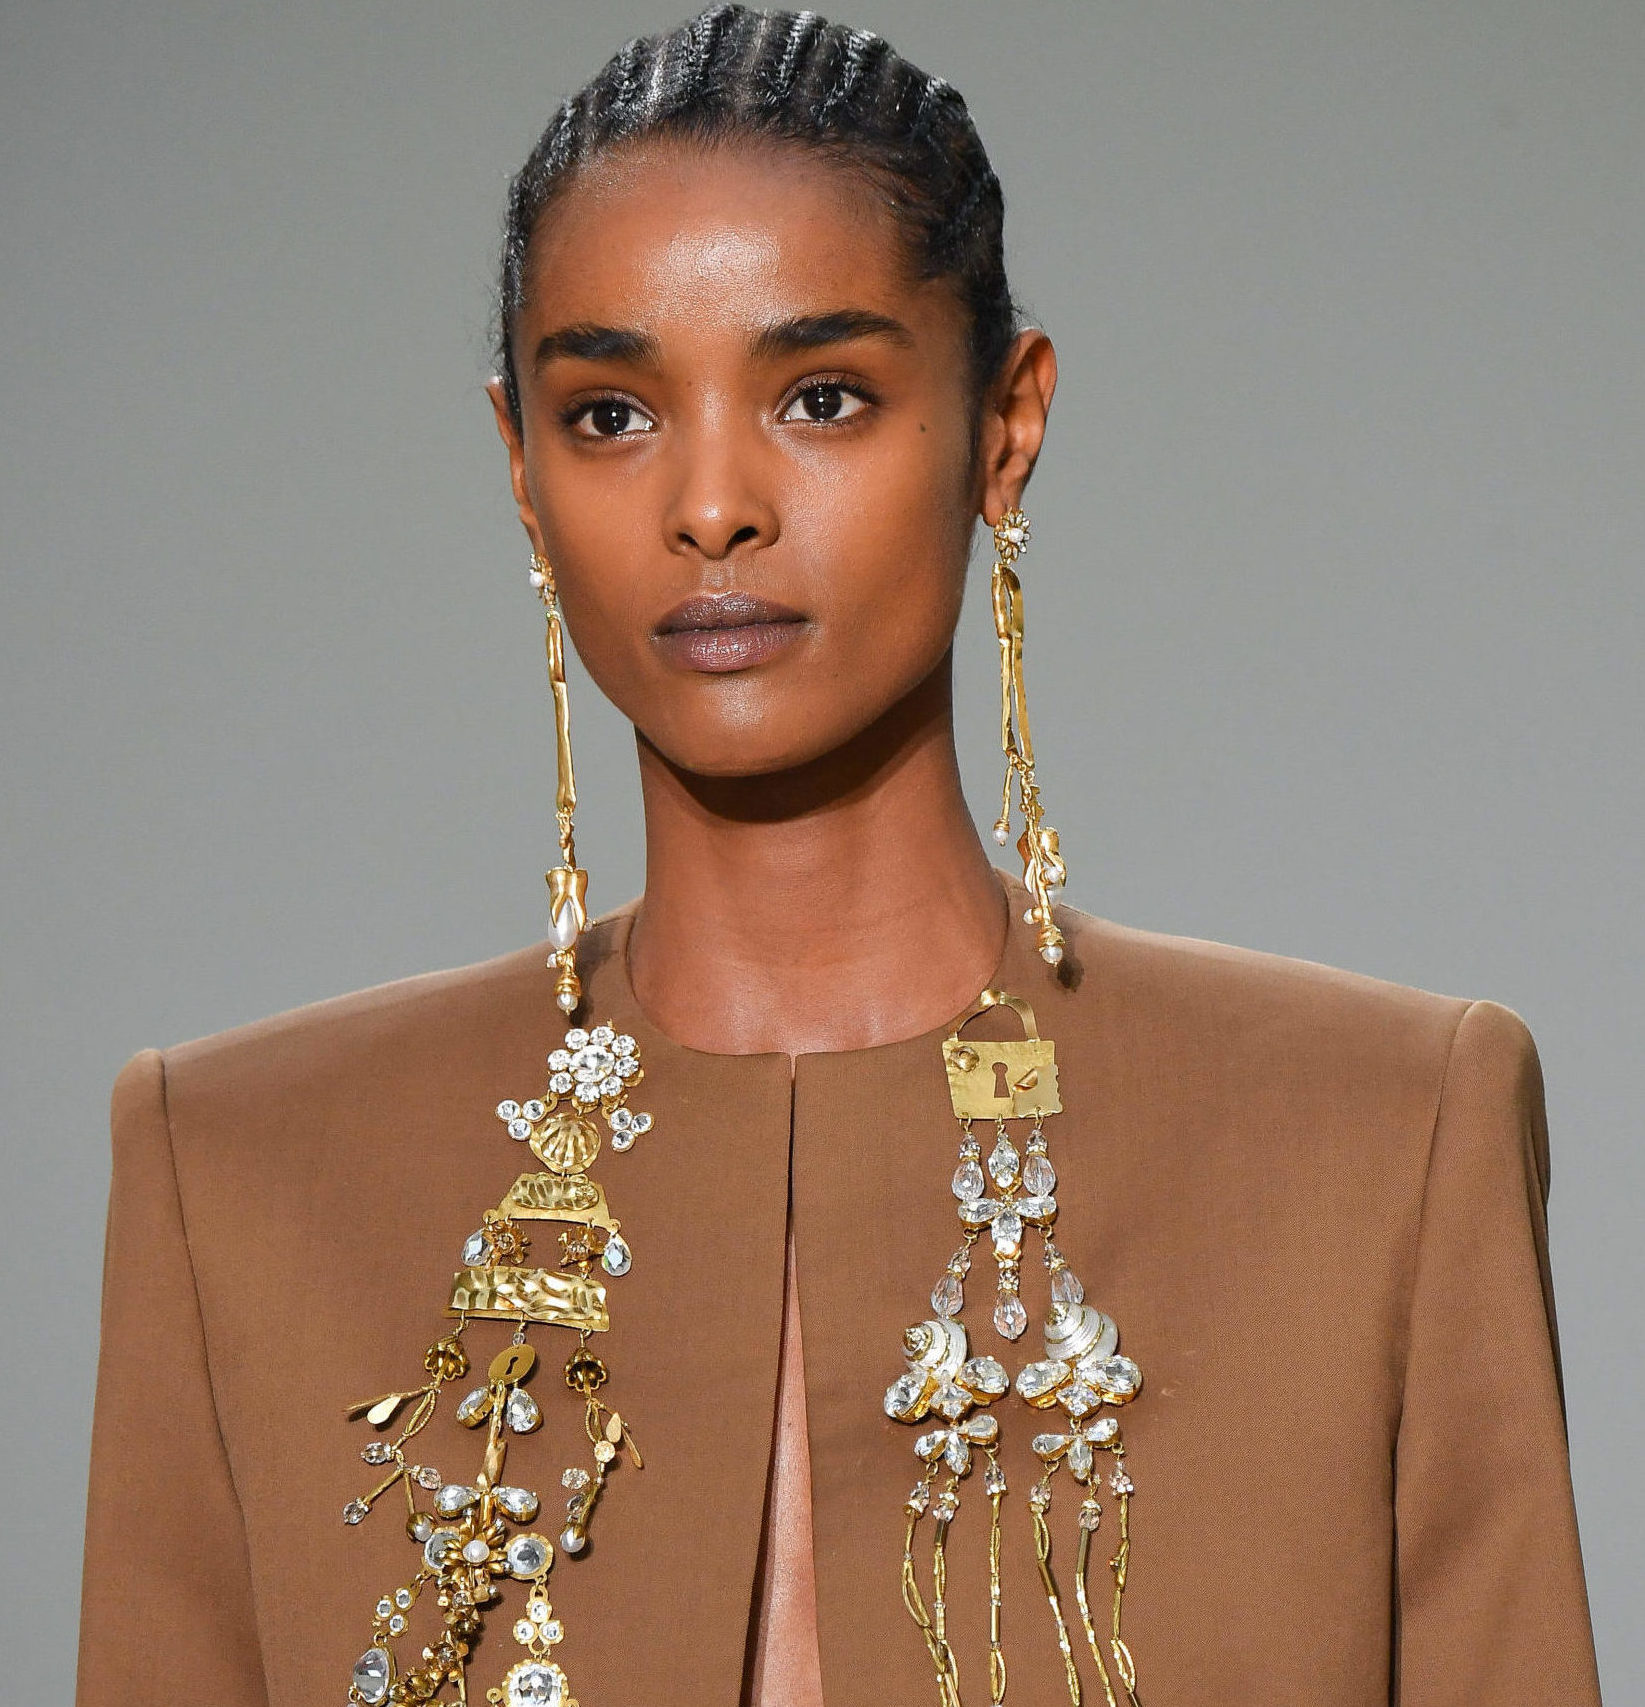 Here Are The Best Beauty Looks From Paris Fashion Week 2020 - Girls United